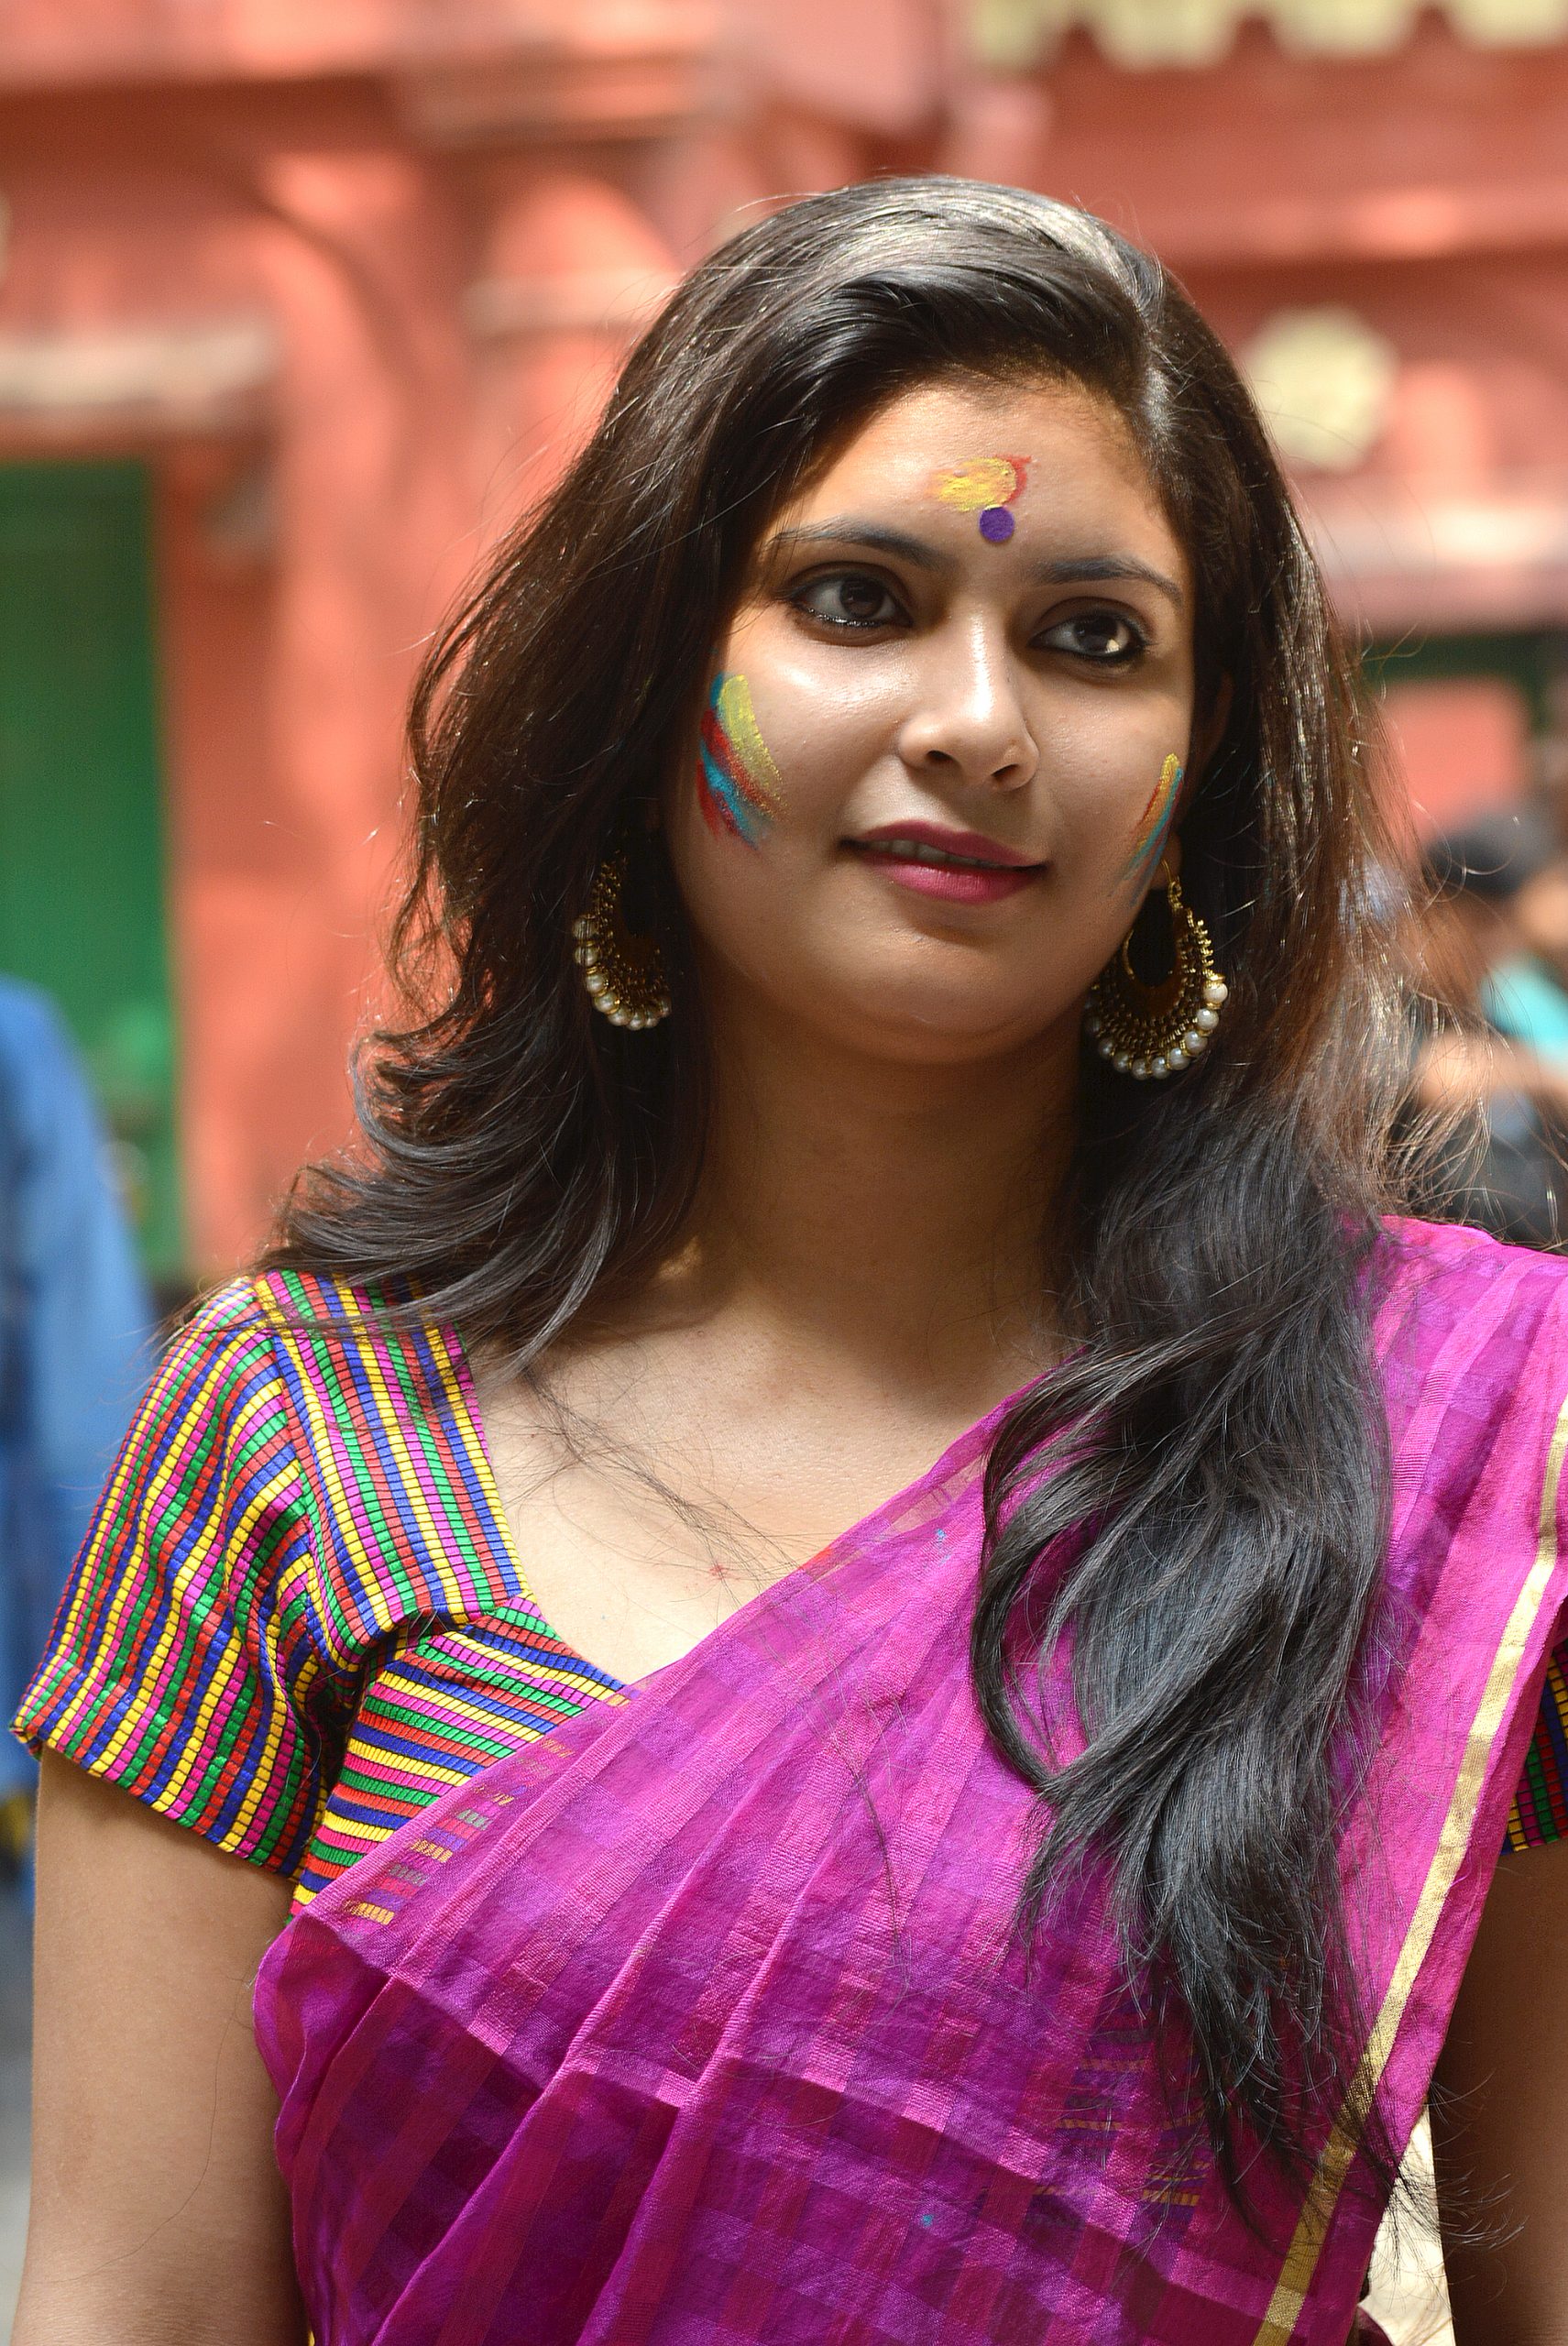 A woman during Holi festival